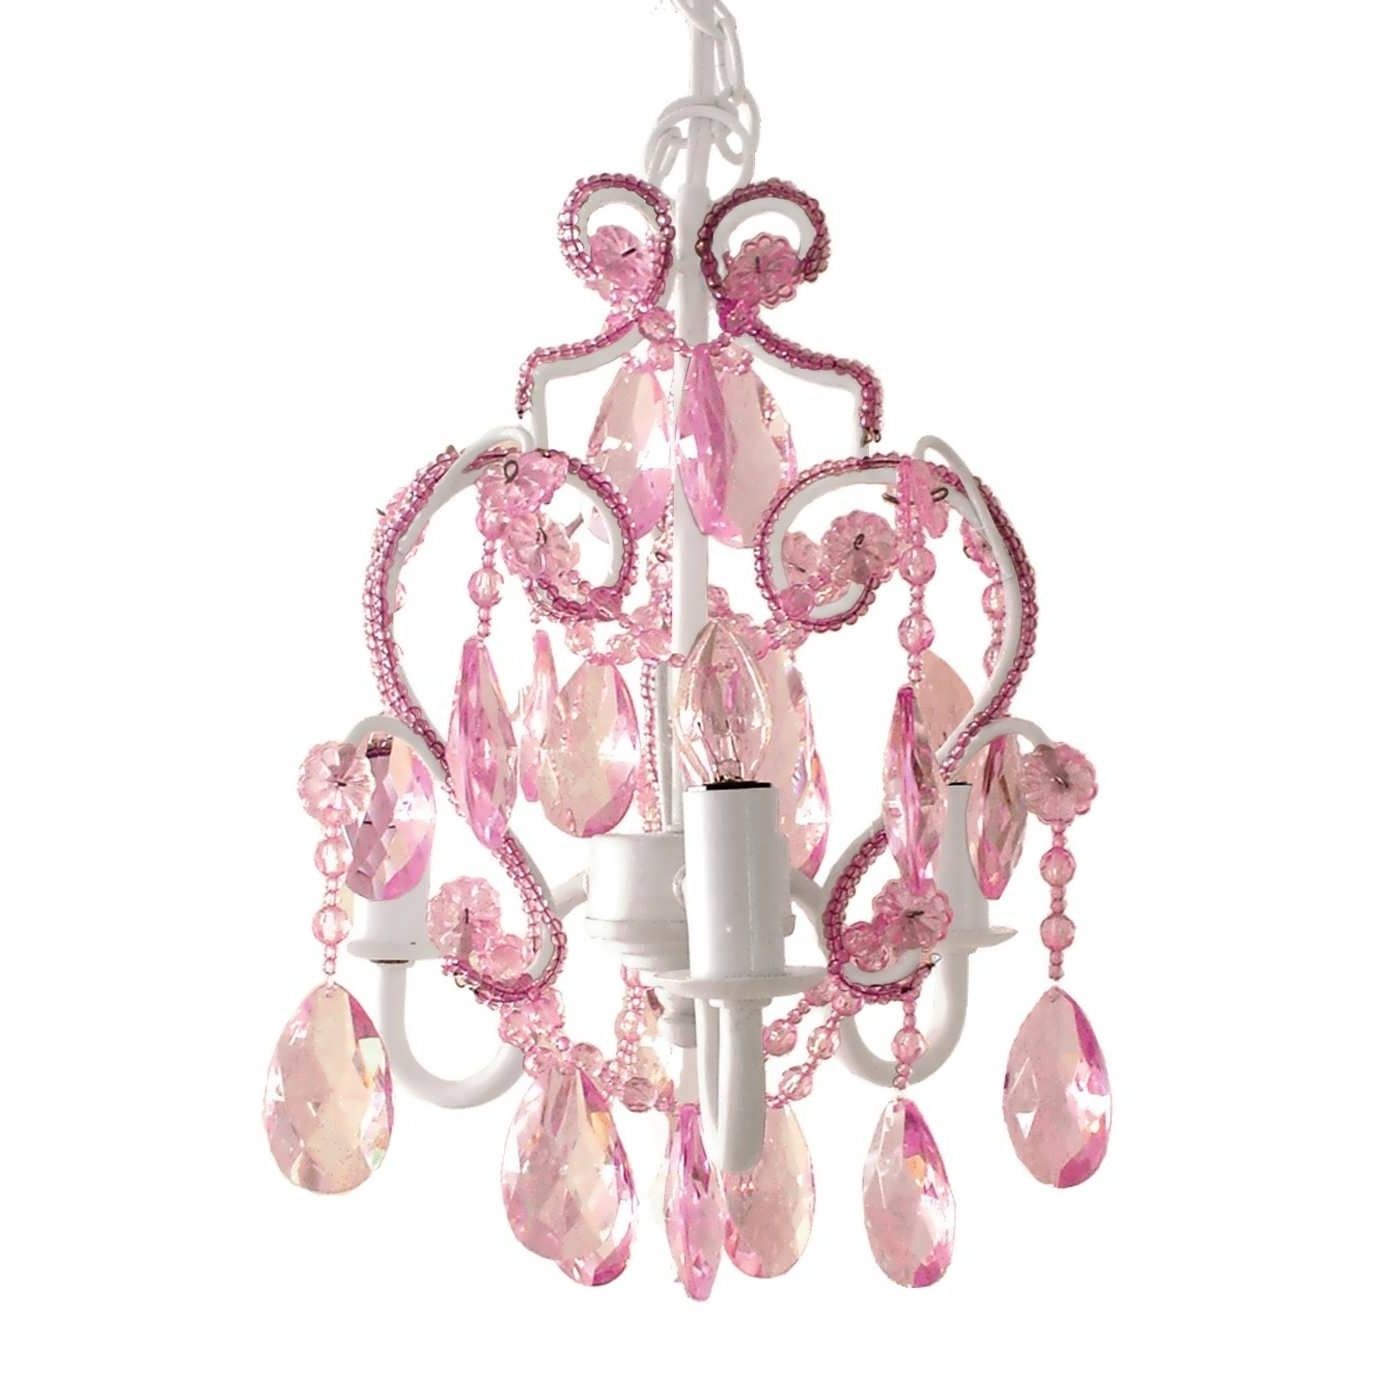 Well Known Chandeliers Design : Awesome Large Pink Gypsy Chandelier Size Of Pertaining To Pink Gypsy Chandeliers (View 14 of 20)